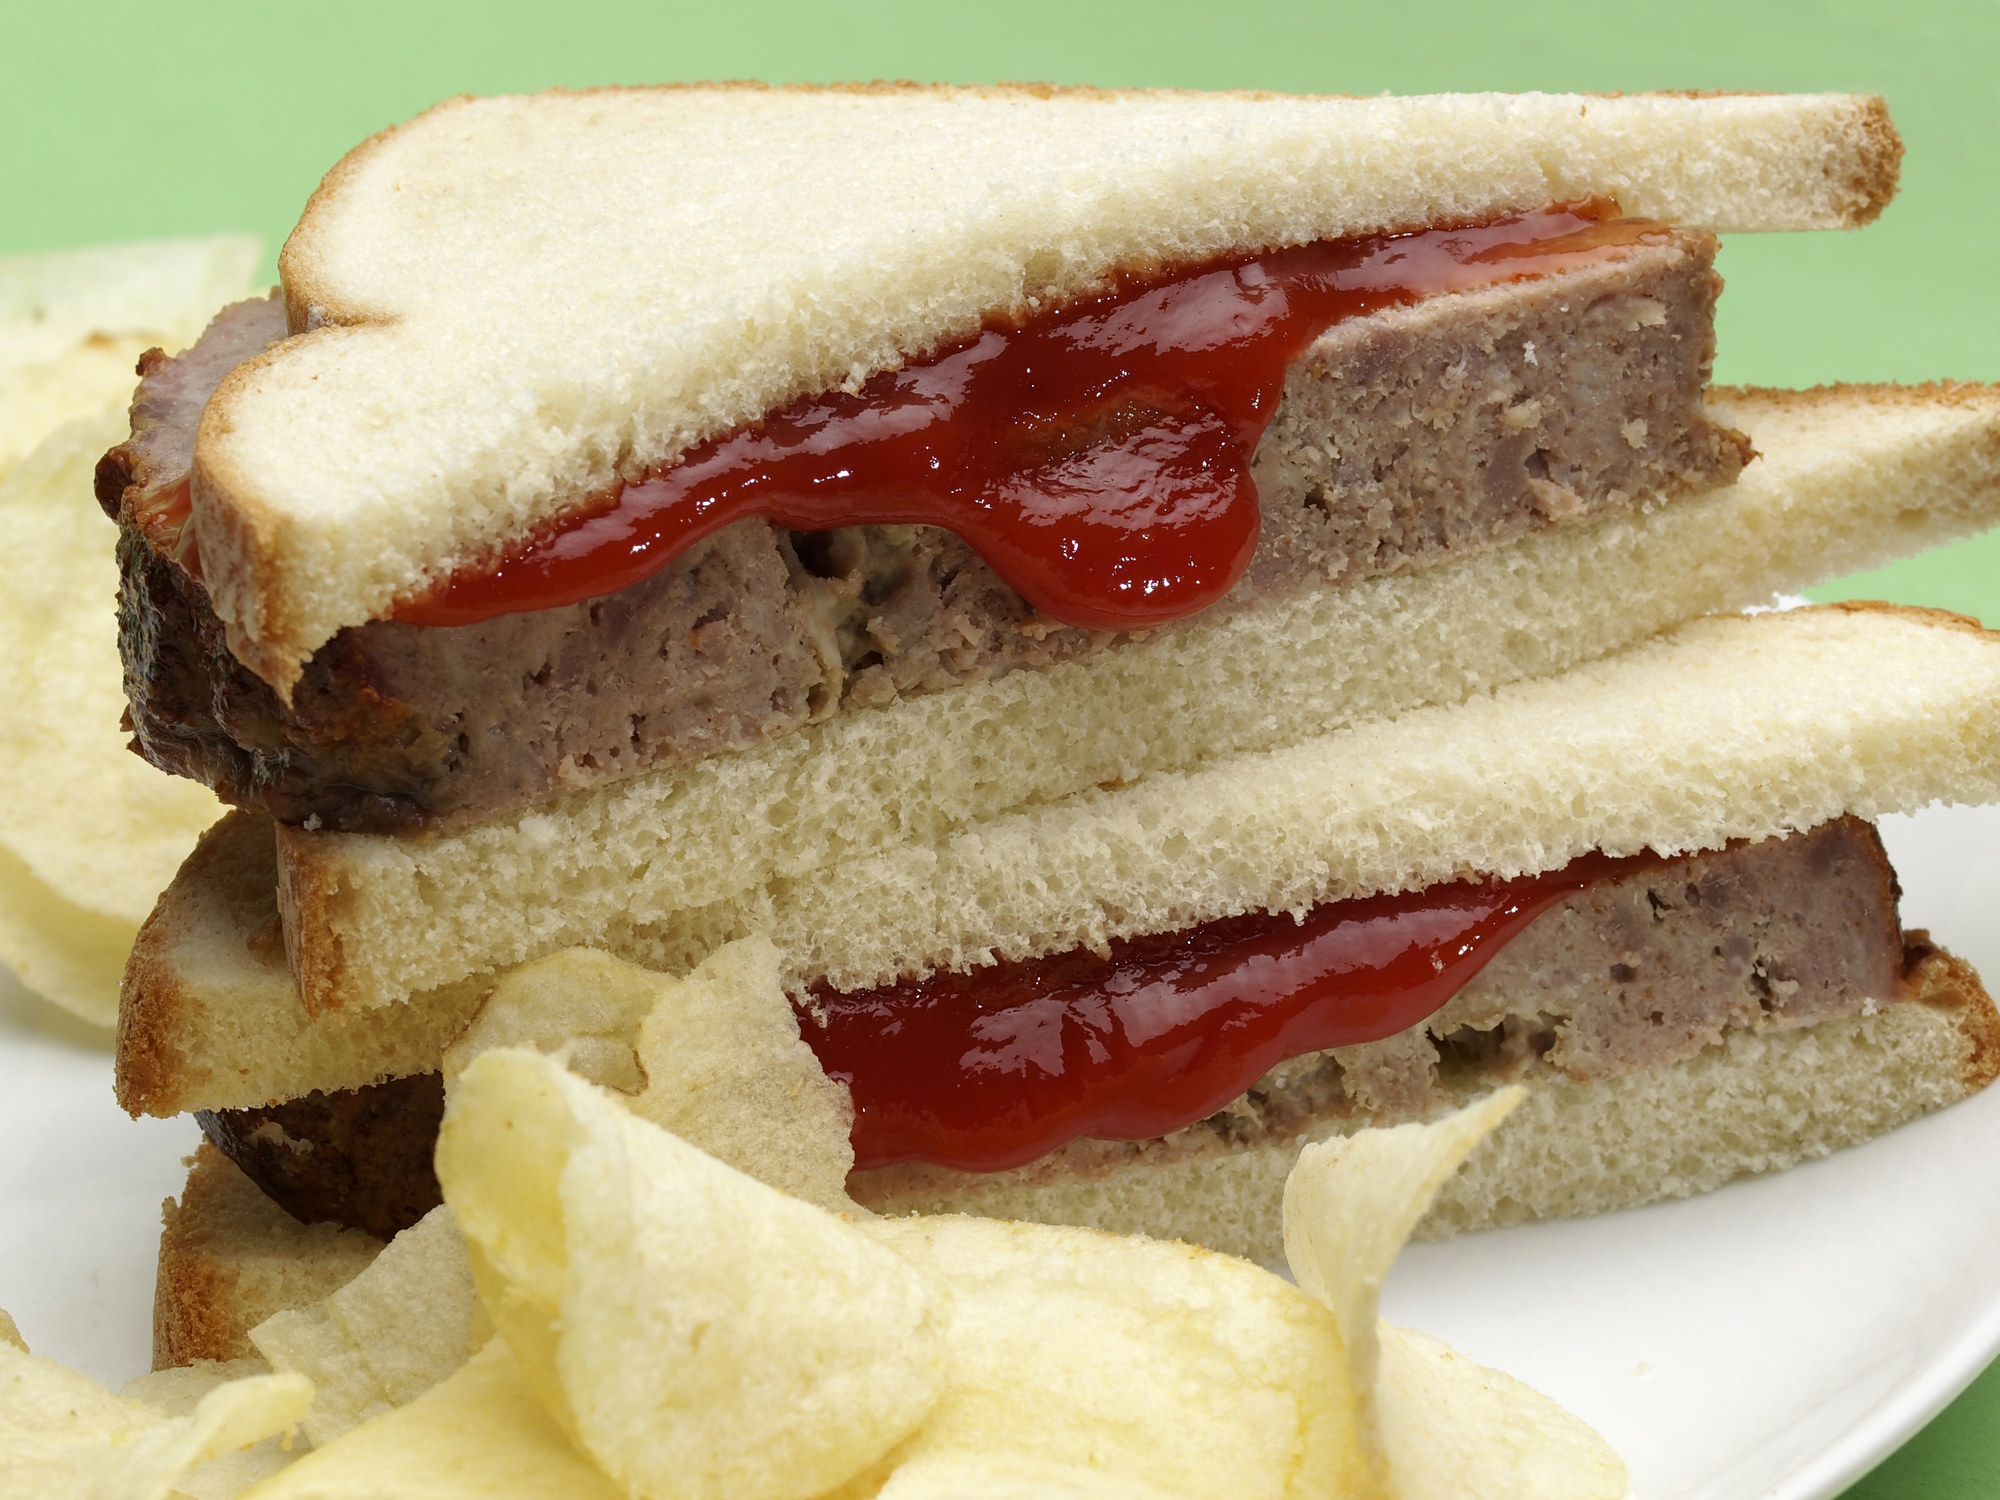 Meatloaf on white bread with ketchup.